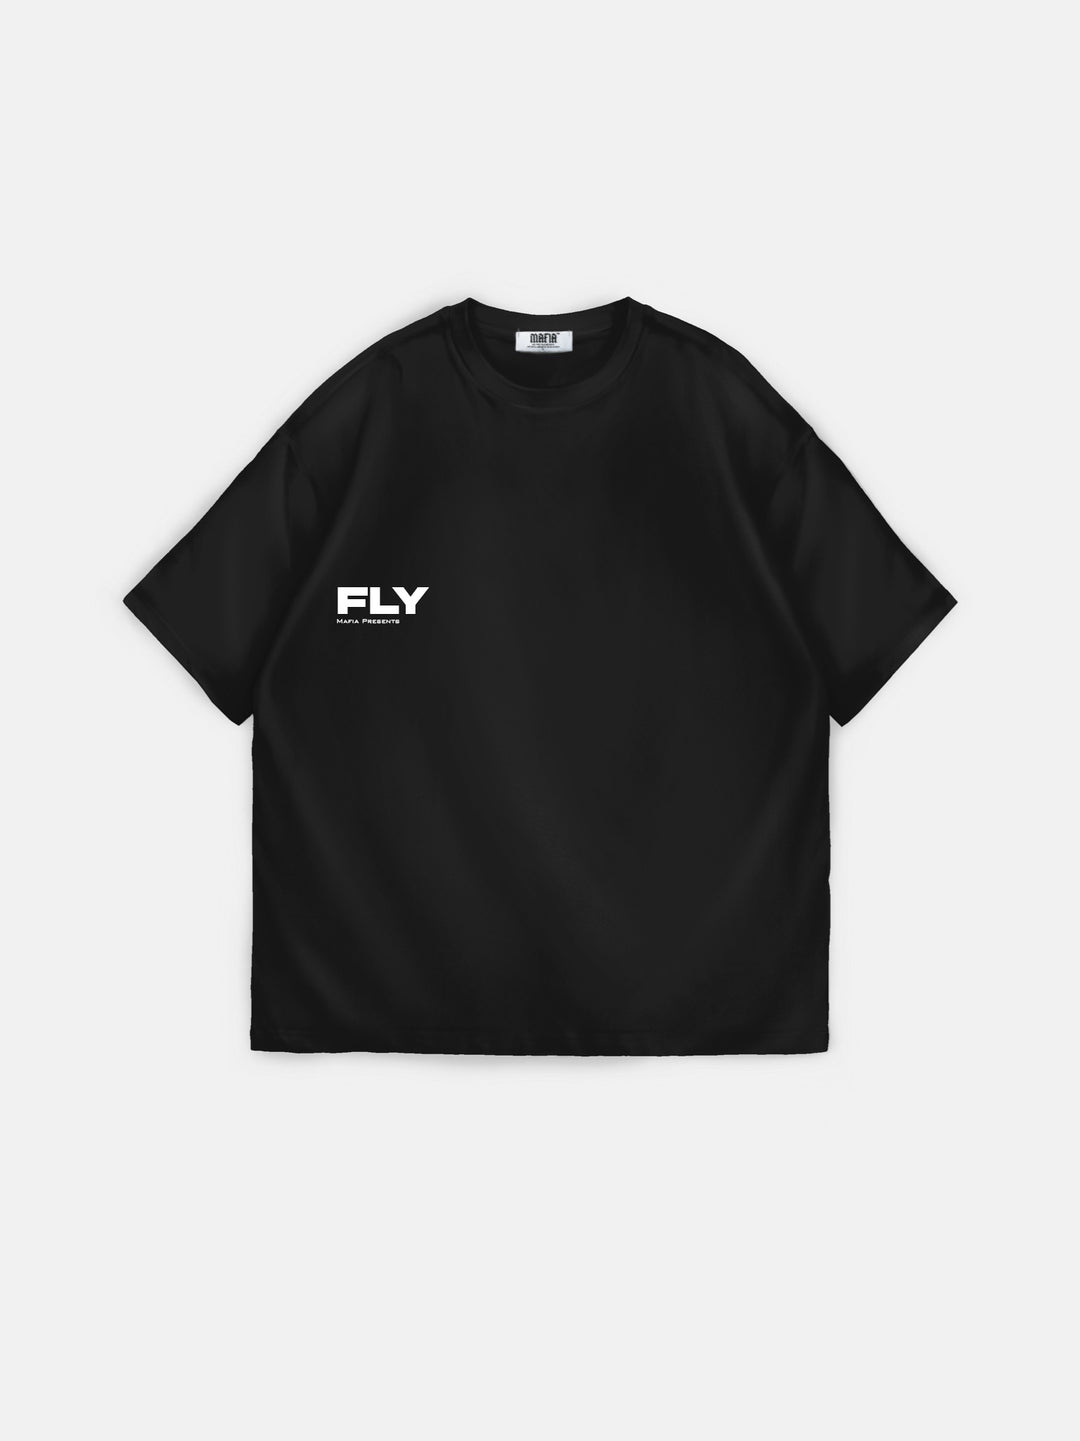 Oversize 'Fly' T-shirt - Black and Green